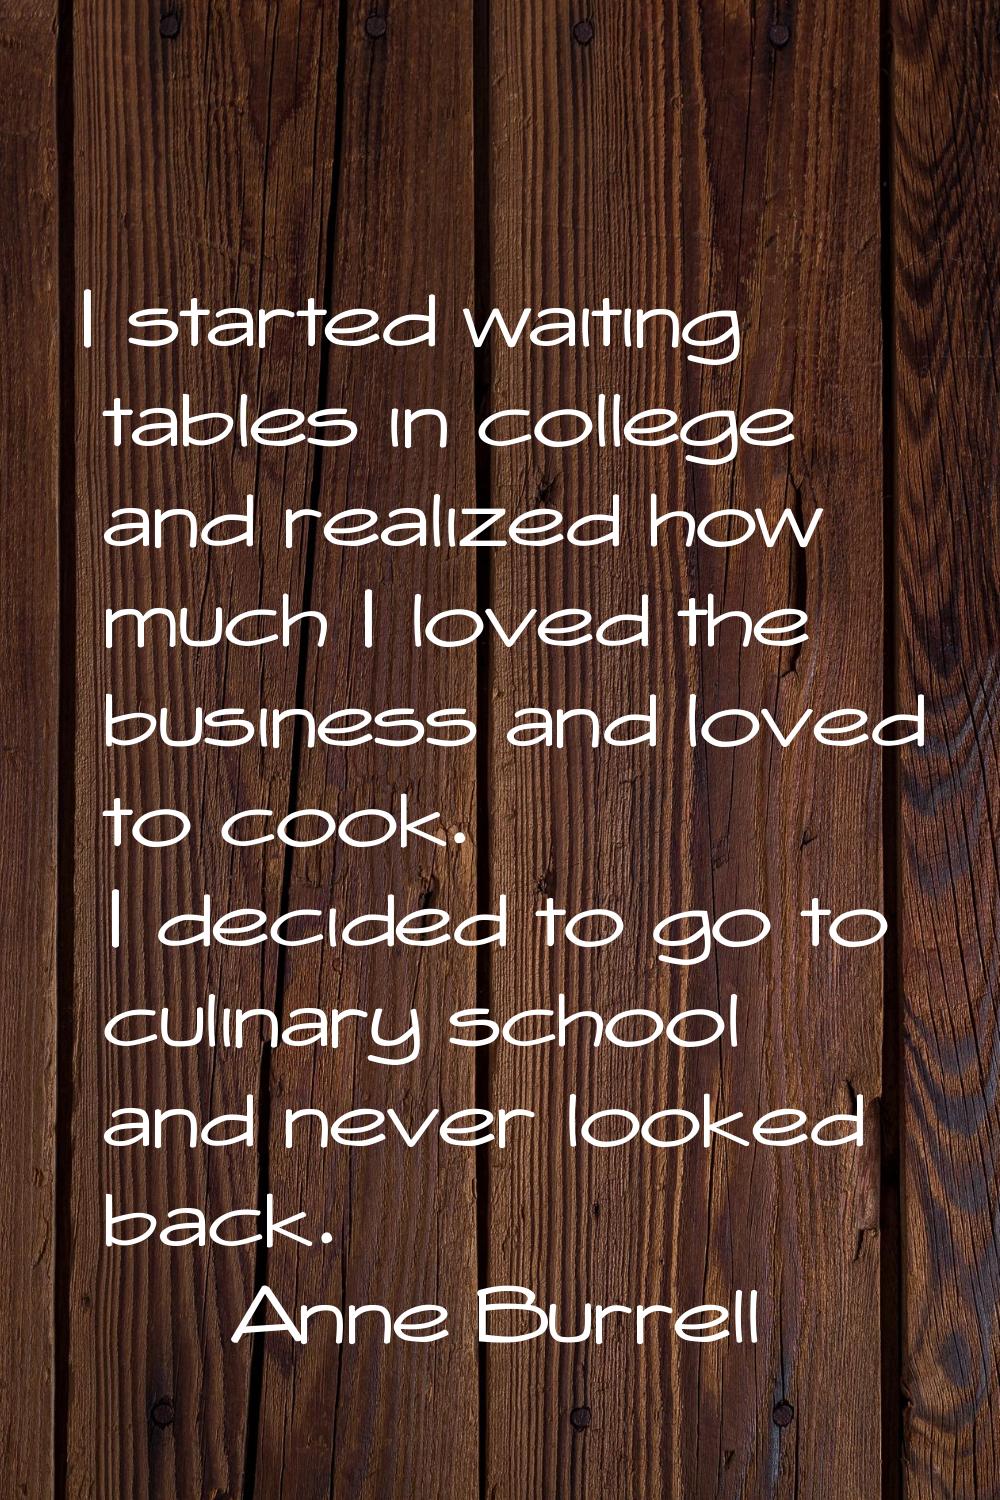 I started waiting tables in college and realized how much I loved the business and loved to cook. I